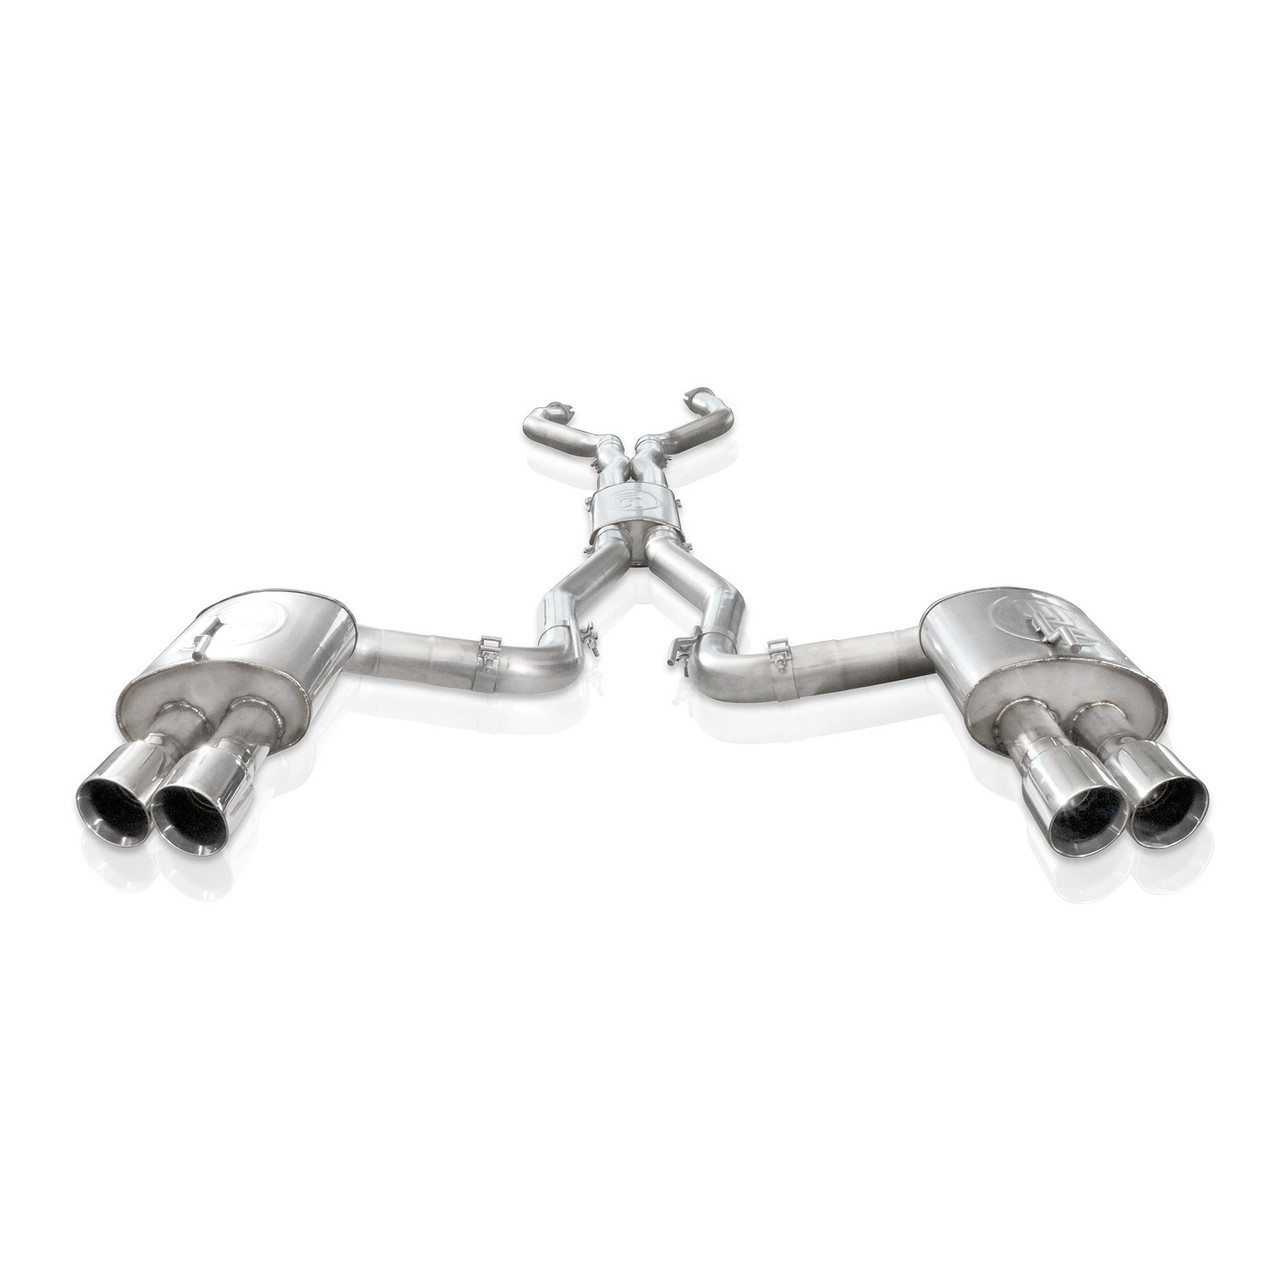 2008-2009 Pontiac G8 Exhaust: Performance Connect, Stainless Works